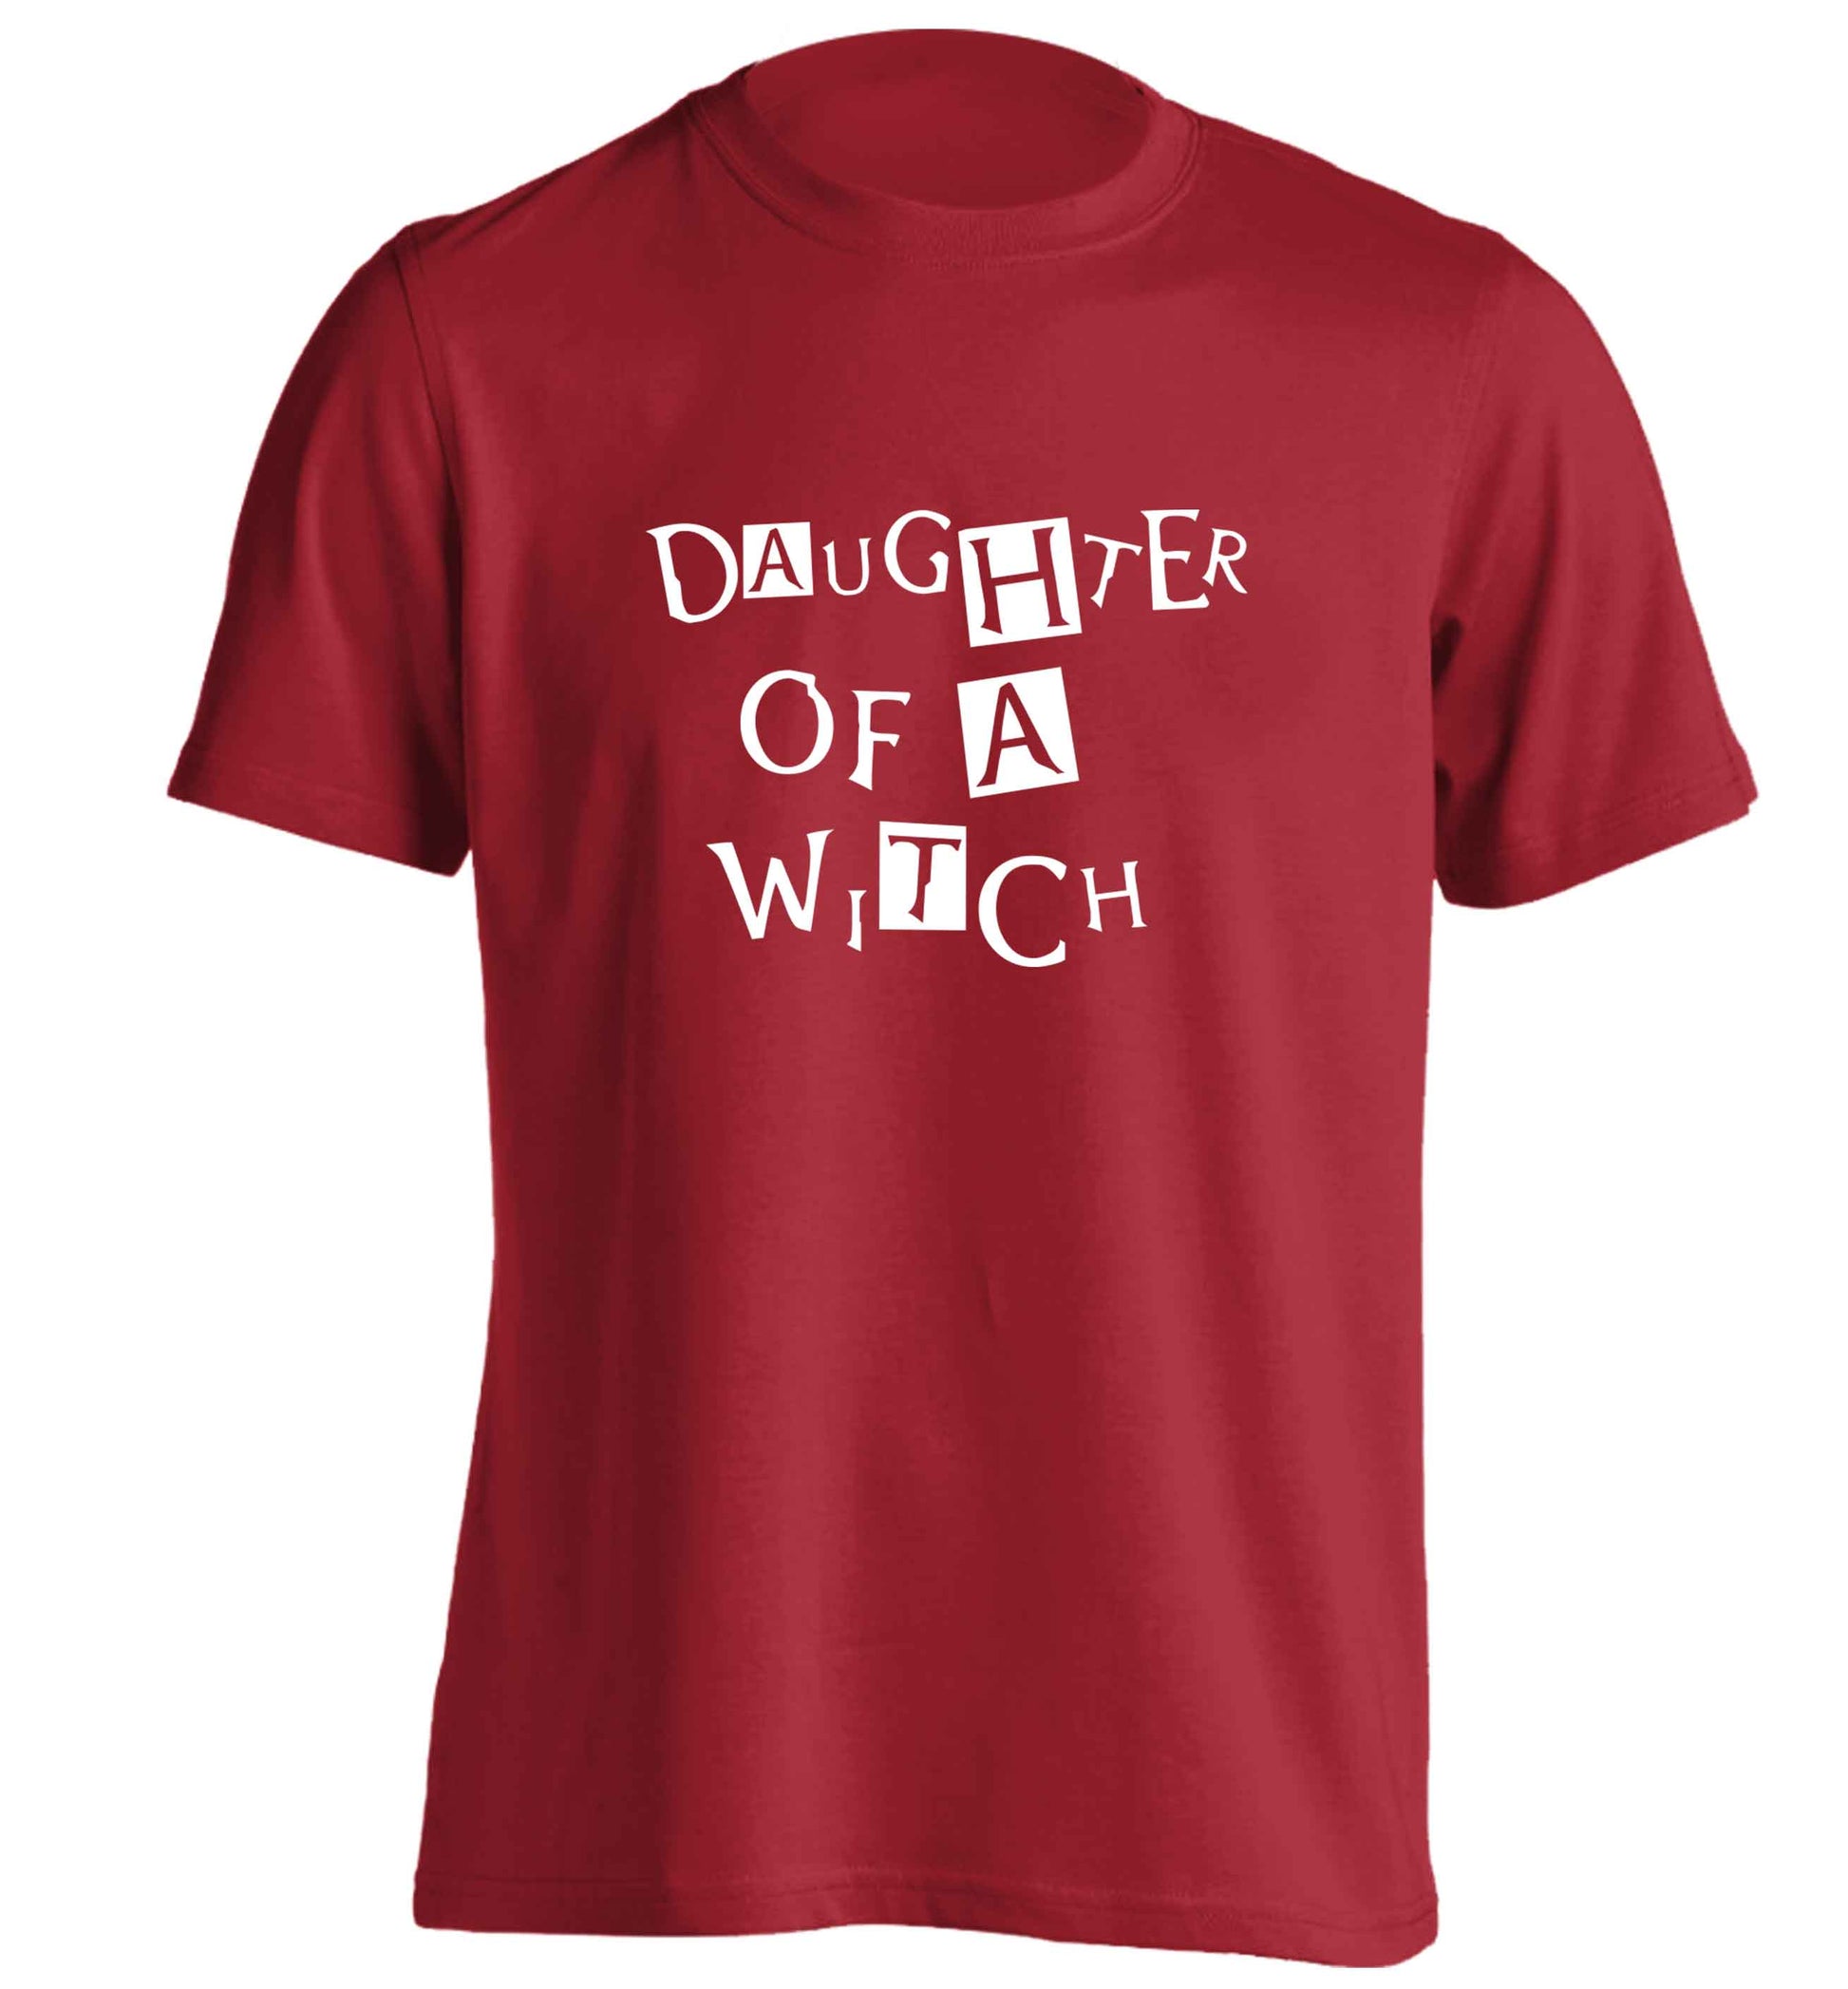 Daughter of a witch adults unisex red Tshirt 2XL